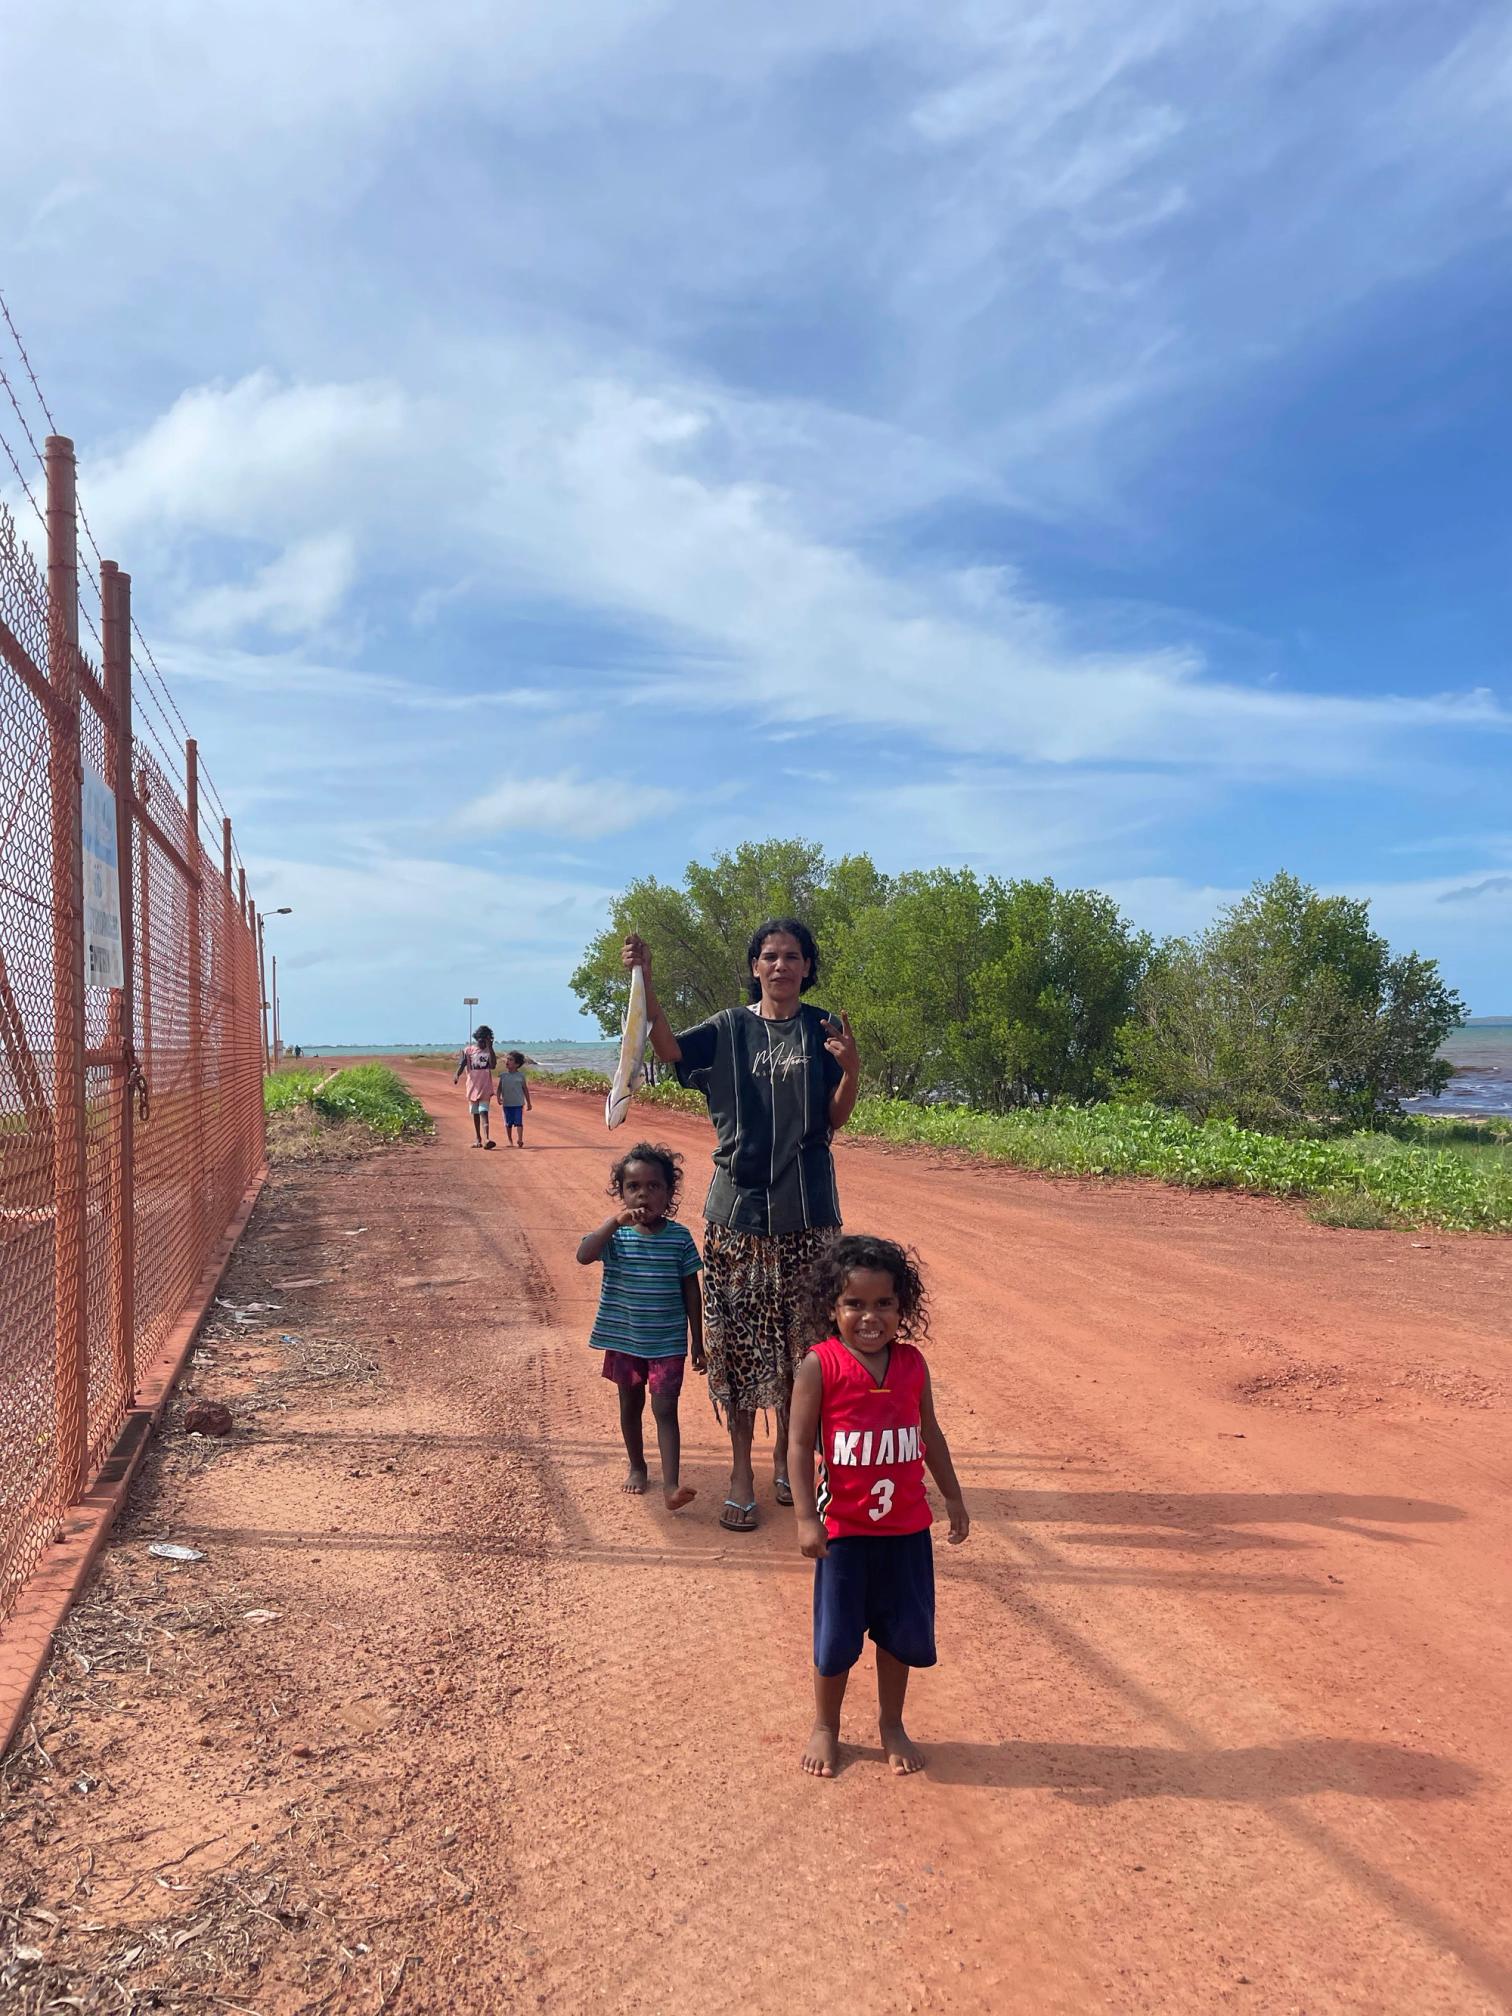 A woman holds a freshly caught fish in her right arm. Next to her and in front of her are two small children. On the dirt orange road behind her are two children following along. The sky is blue and the ocean is visible far in the background.